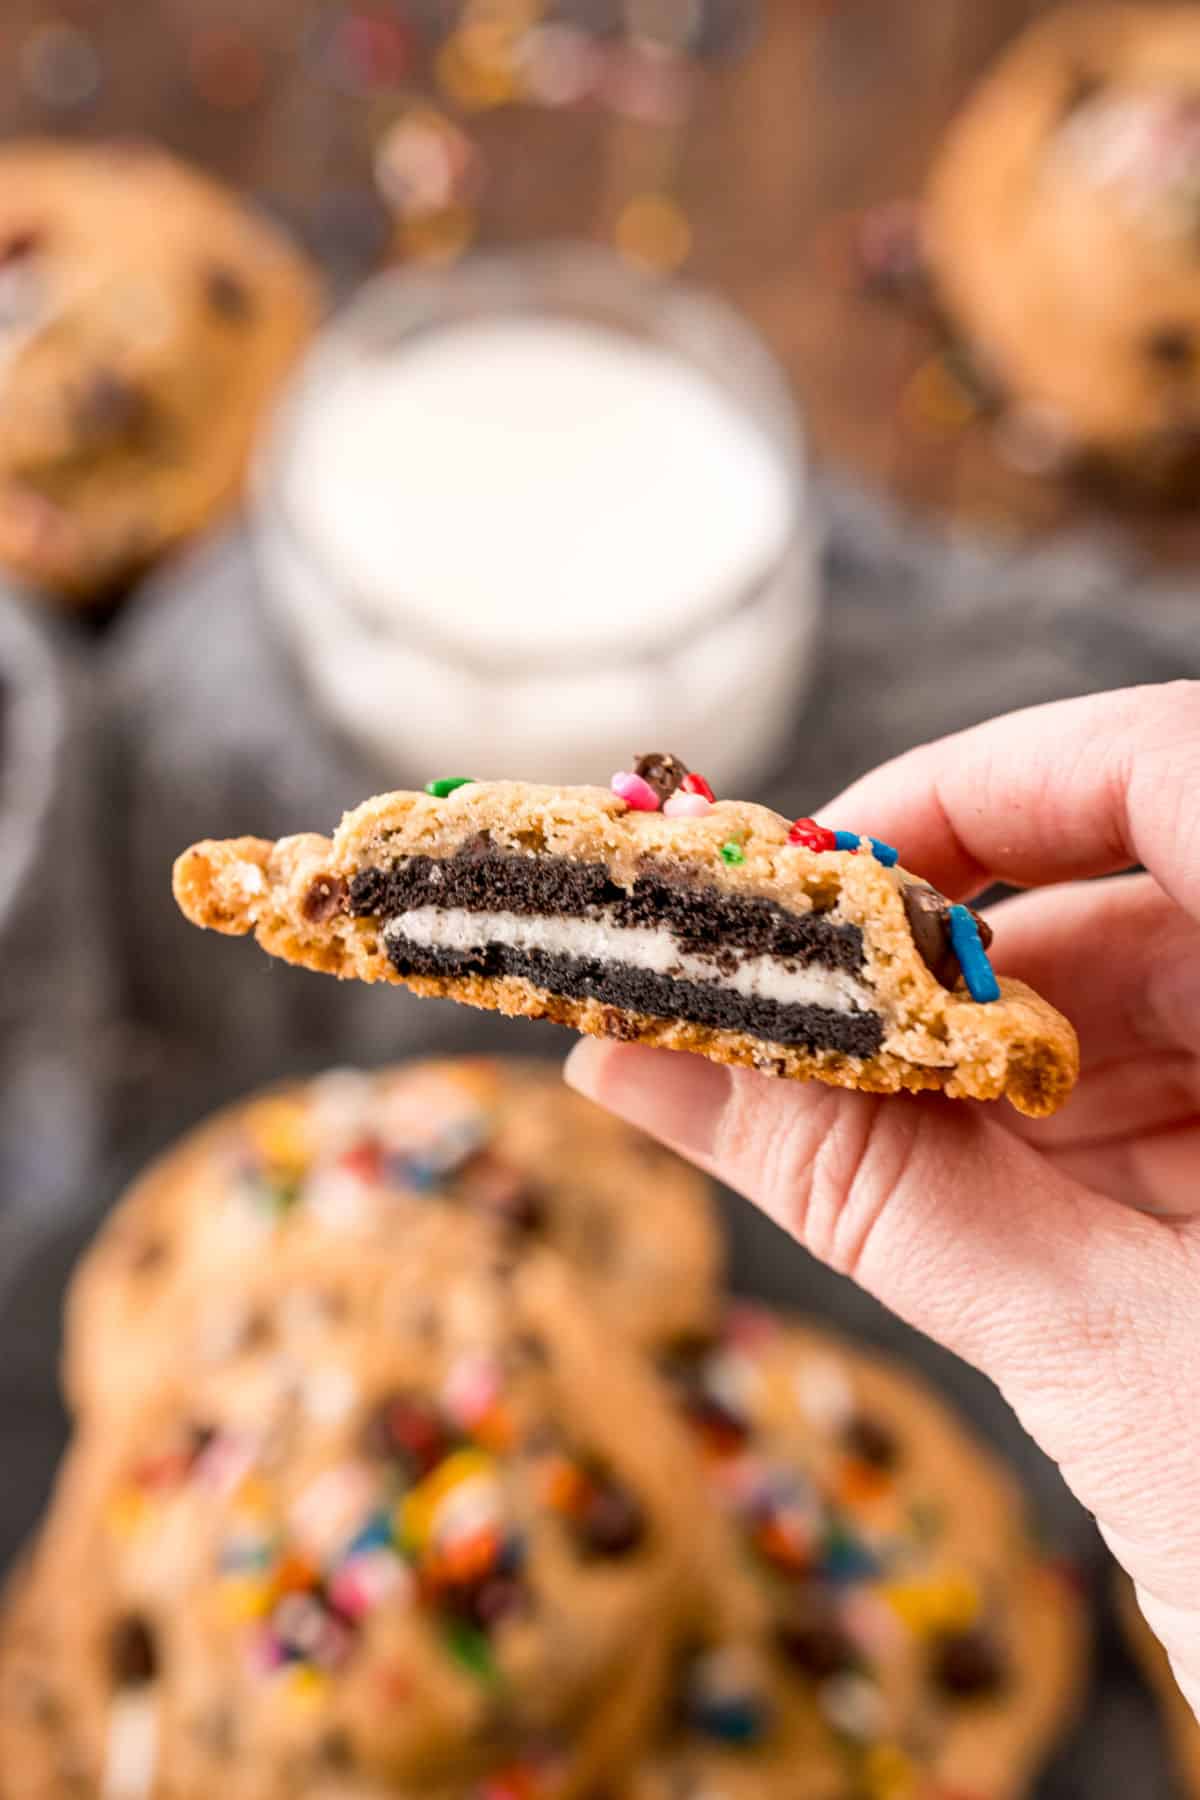 Oreo stuffed chocolate chip cookie with a bite removed to show filling.